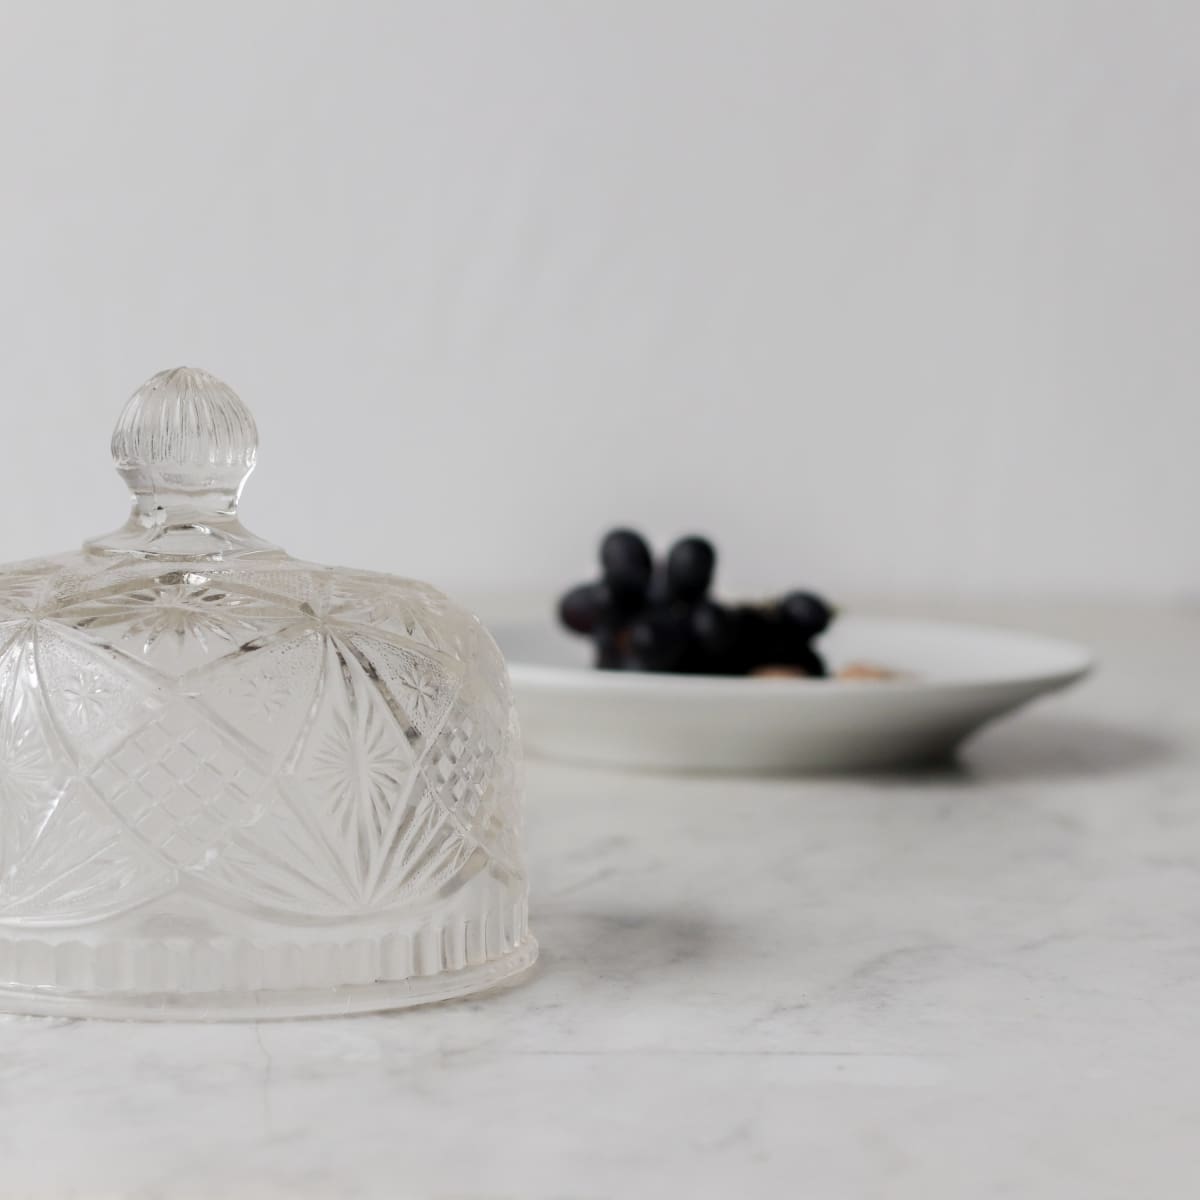 Vintage French Glass Dome - the french kitchen